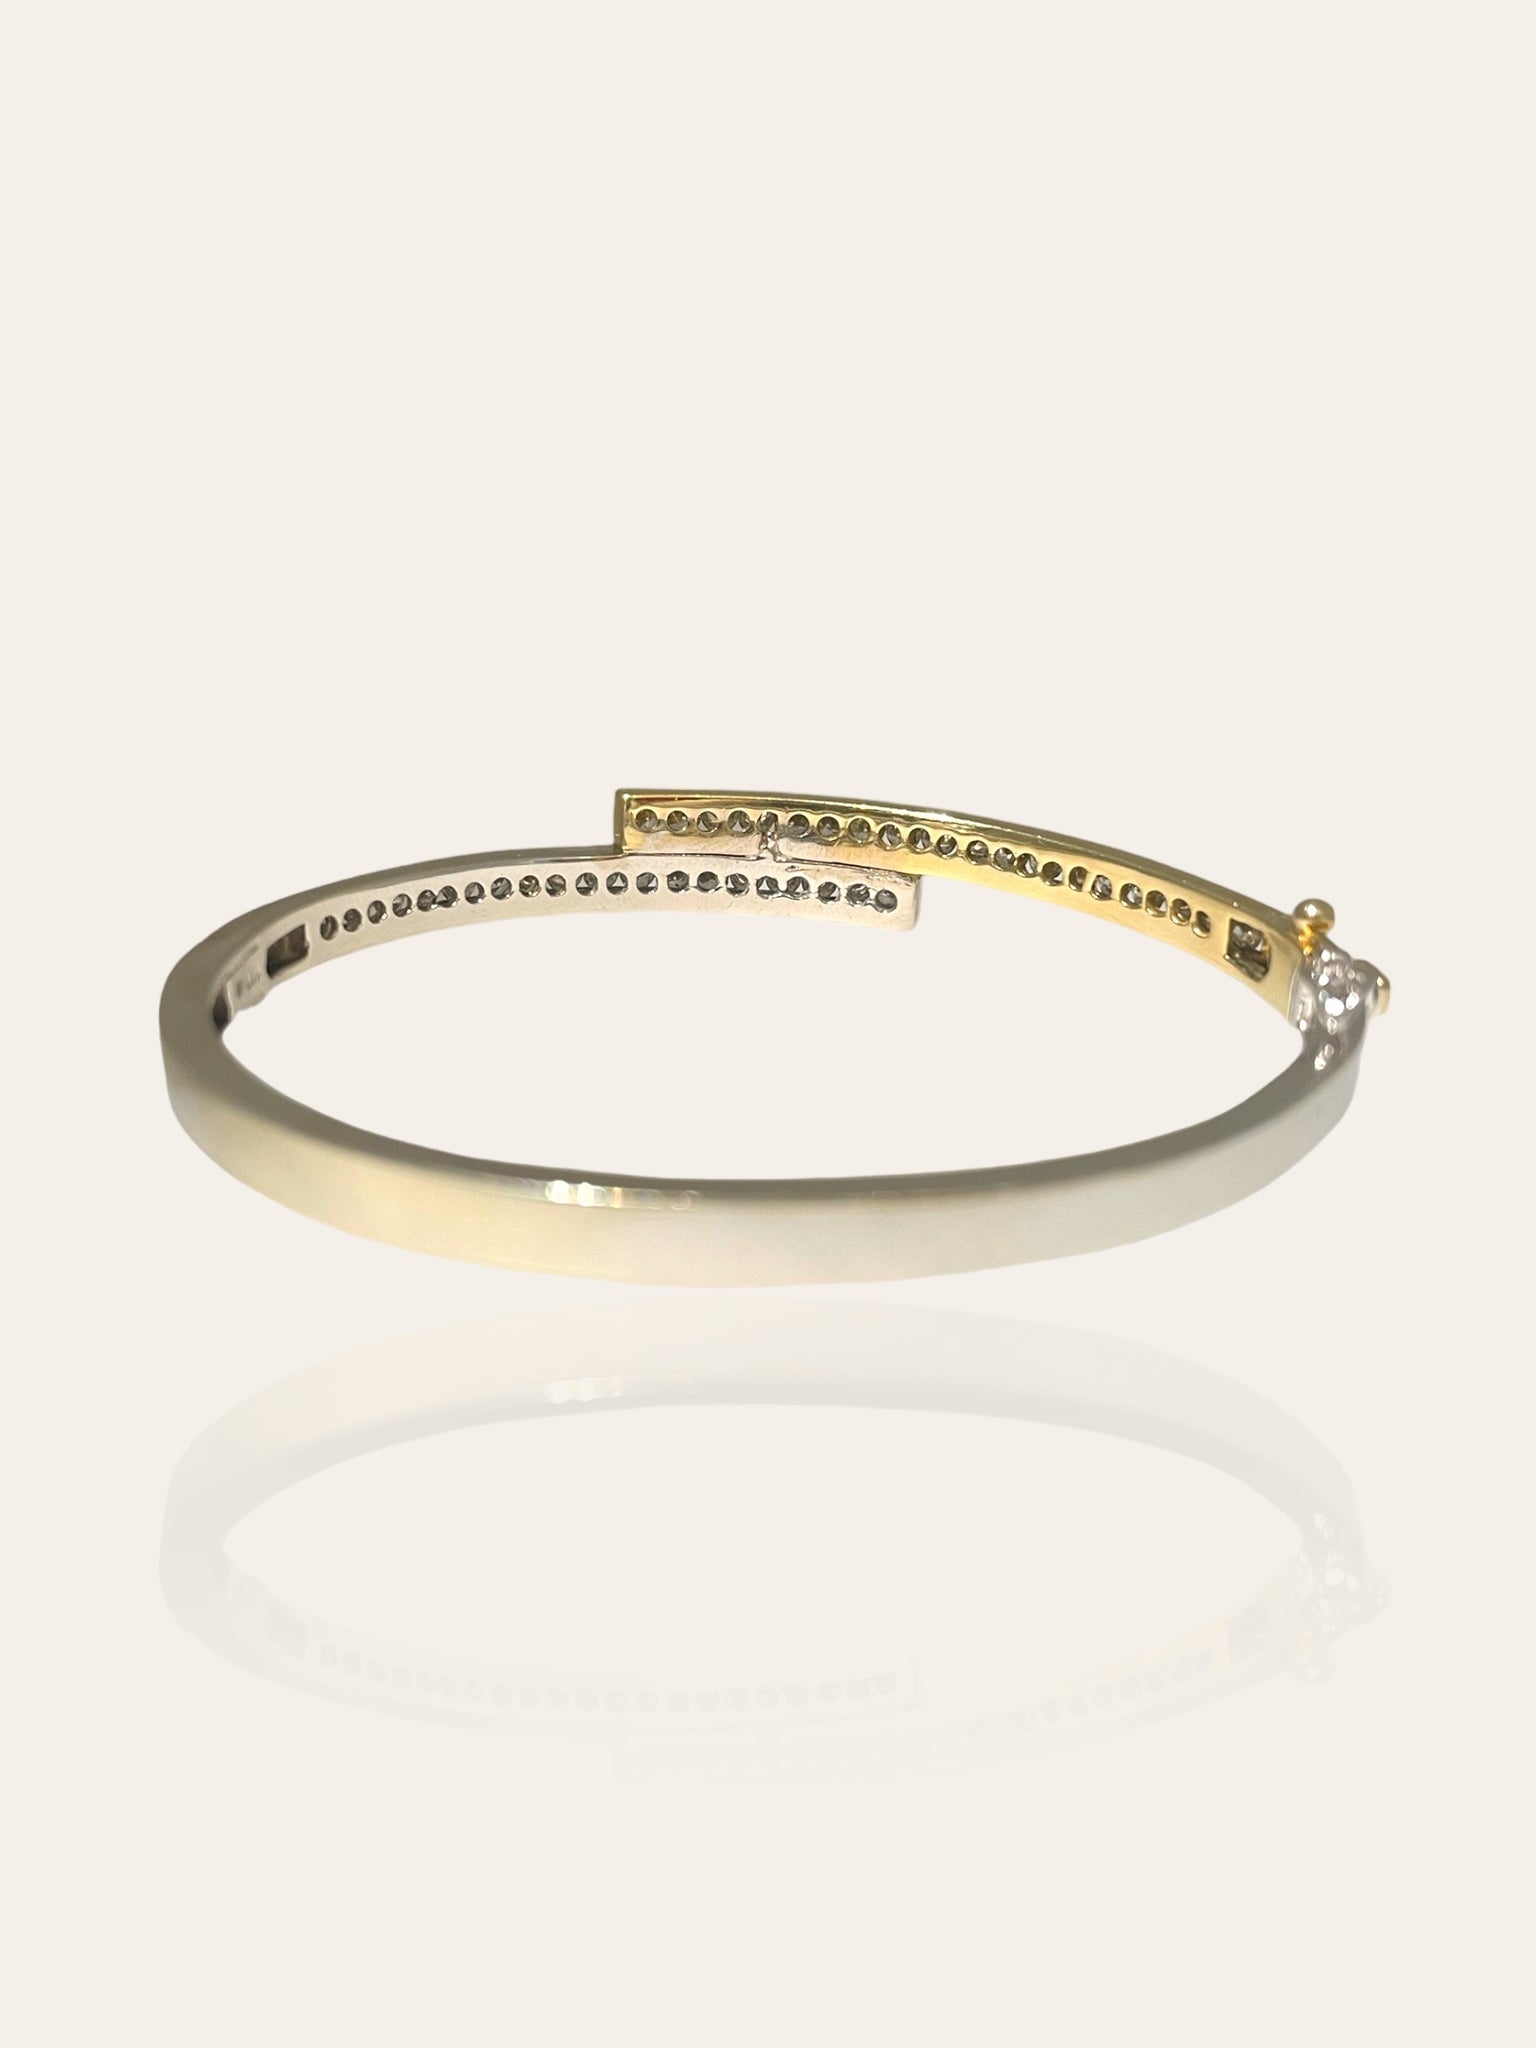 Concept yellow gold and white gold bracelet with diamond